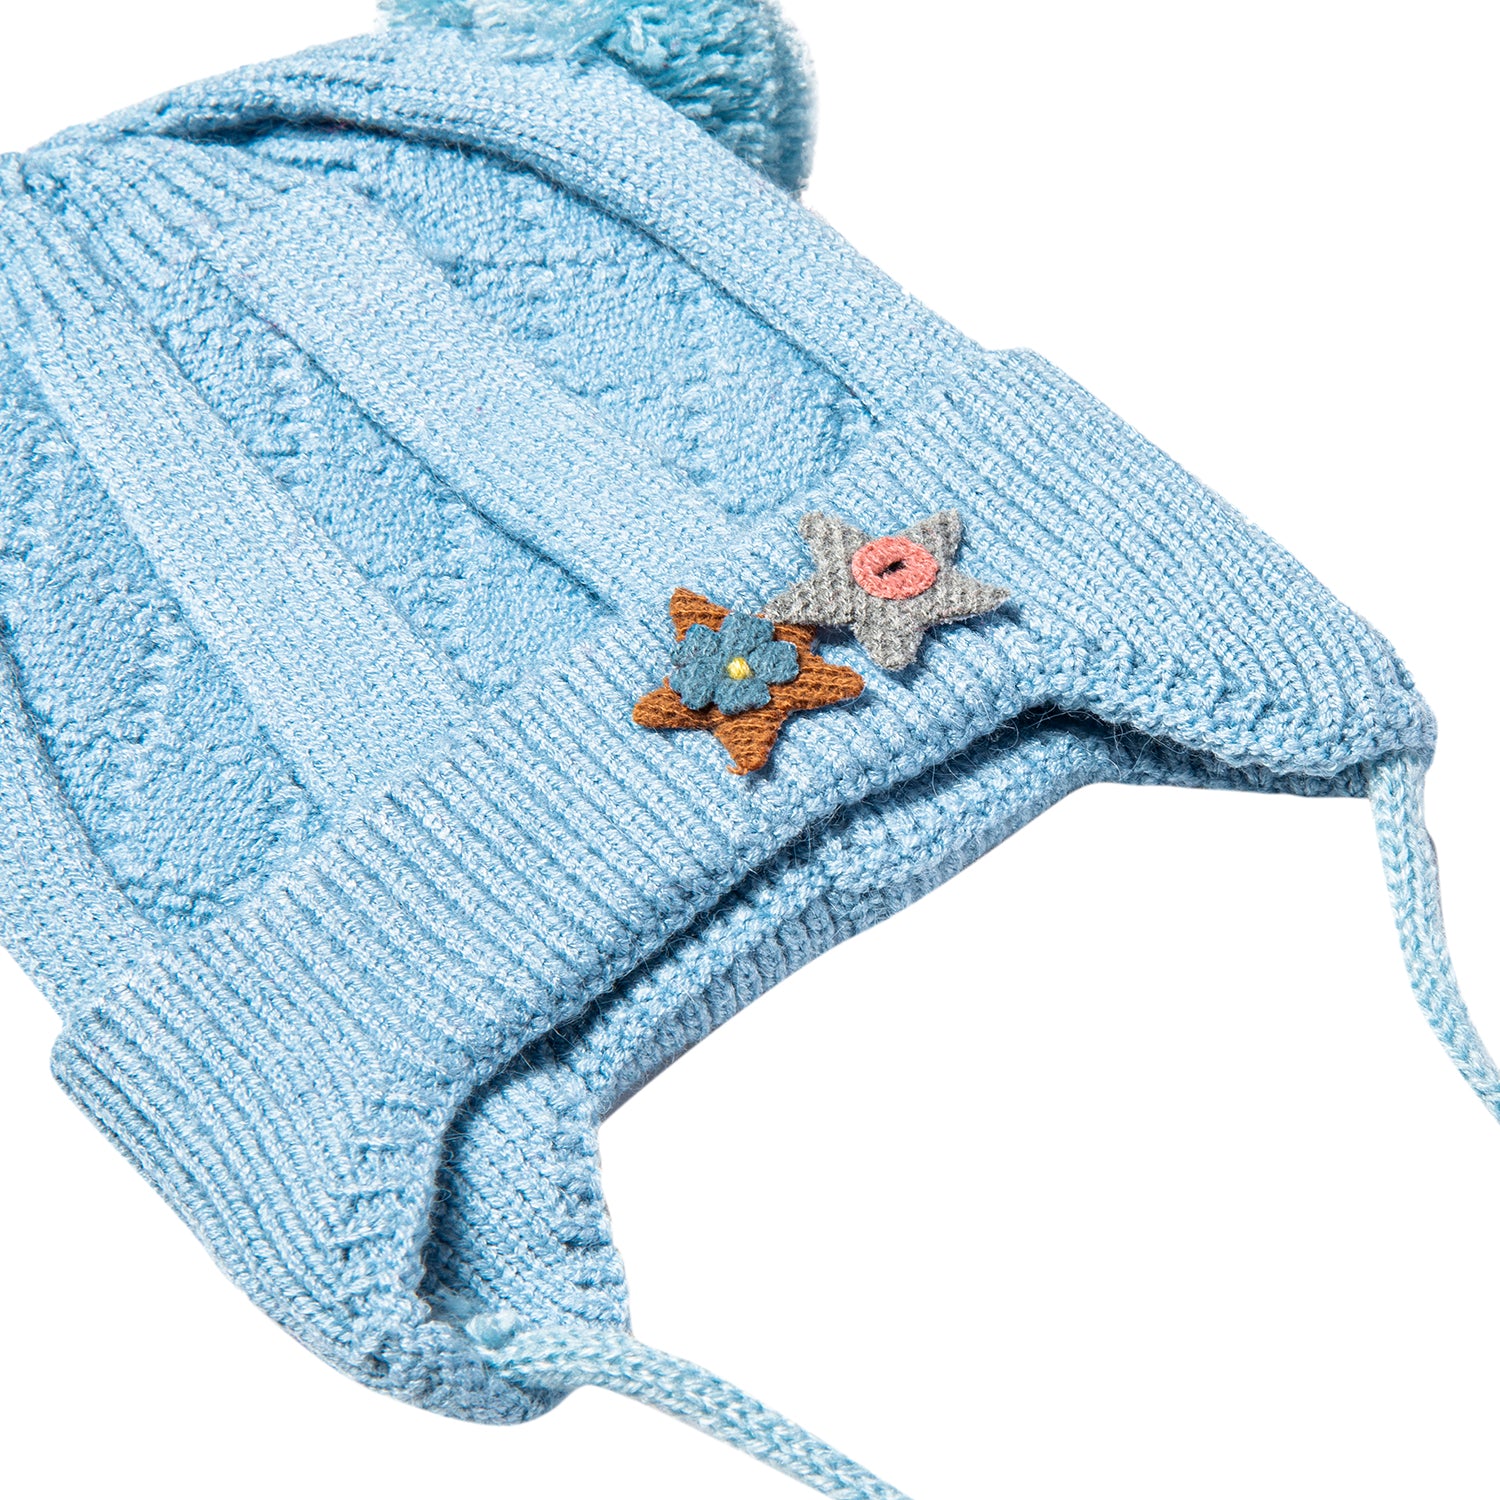 Knit Woollen Cap With Tie For Ear Cover Starry Pom Pom Blue - Baby Moo